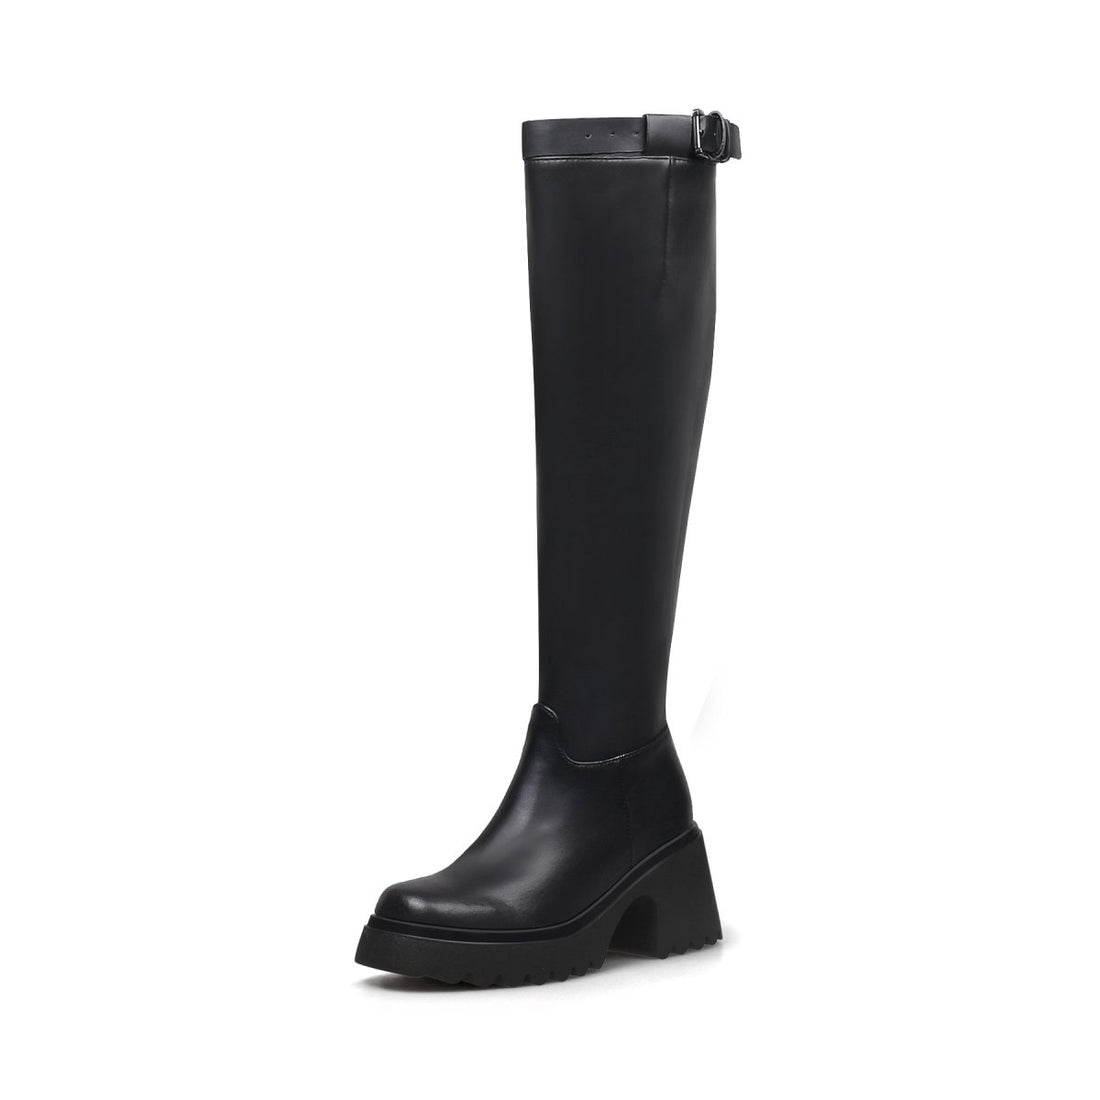 Equestrian Inspired Black Knee-high Boots - 0cm